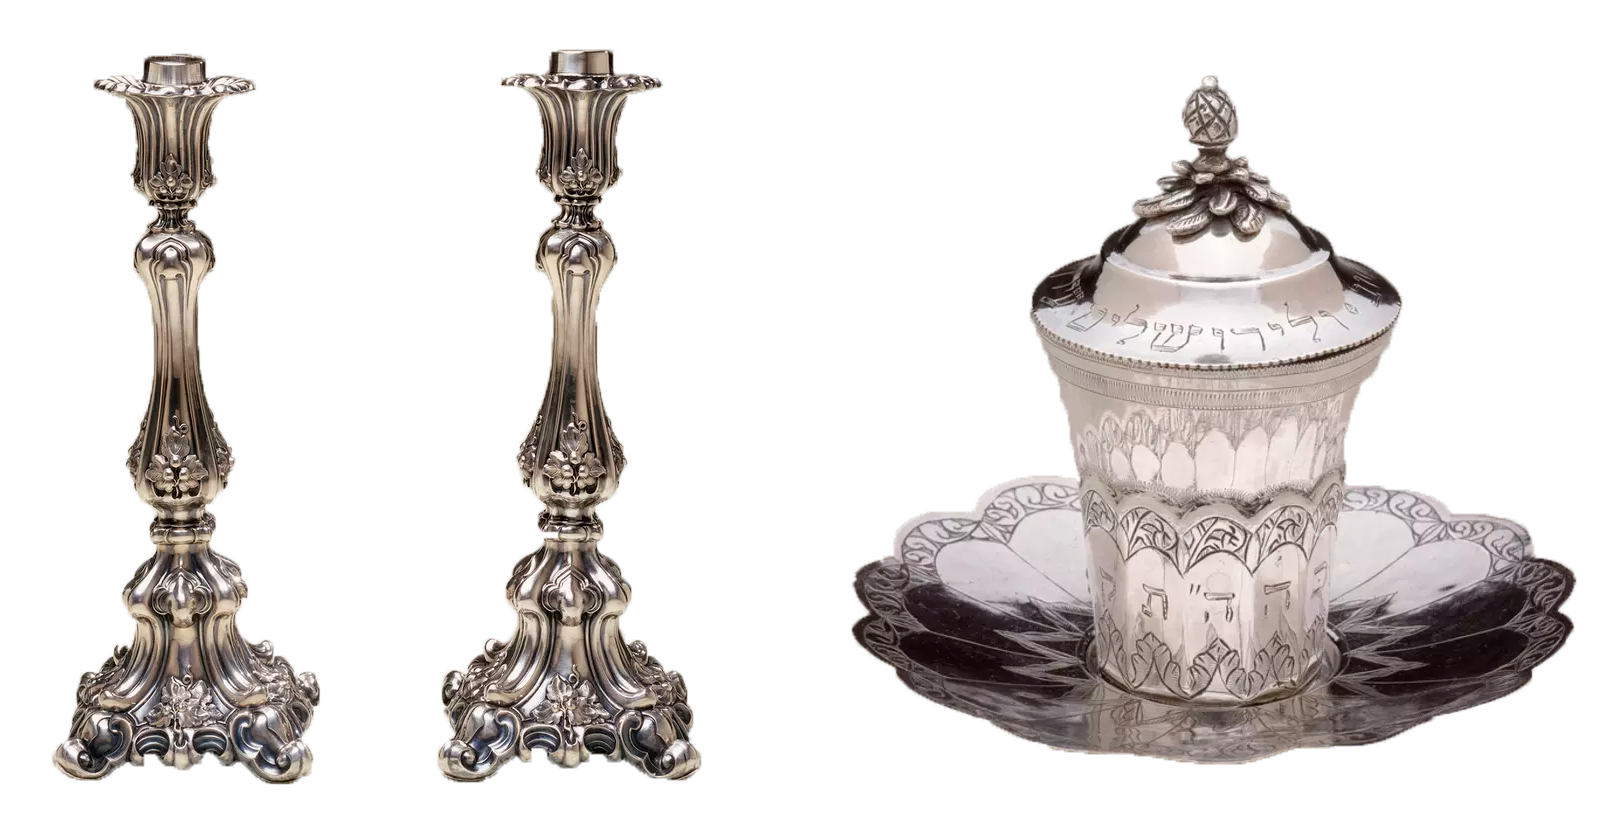 Left: Candlesticks, Germany, c. 1866, silver, 35.9 × 13.7 × 13.7 cm (Jewish Museum); right: Kiddush cup and saucer, Ottoman Empire, 1803, silver, 8.3 x 7.4 x 7.4 cm (Jewish Museum)